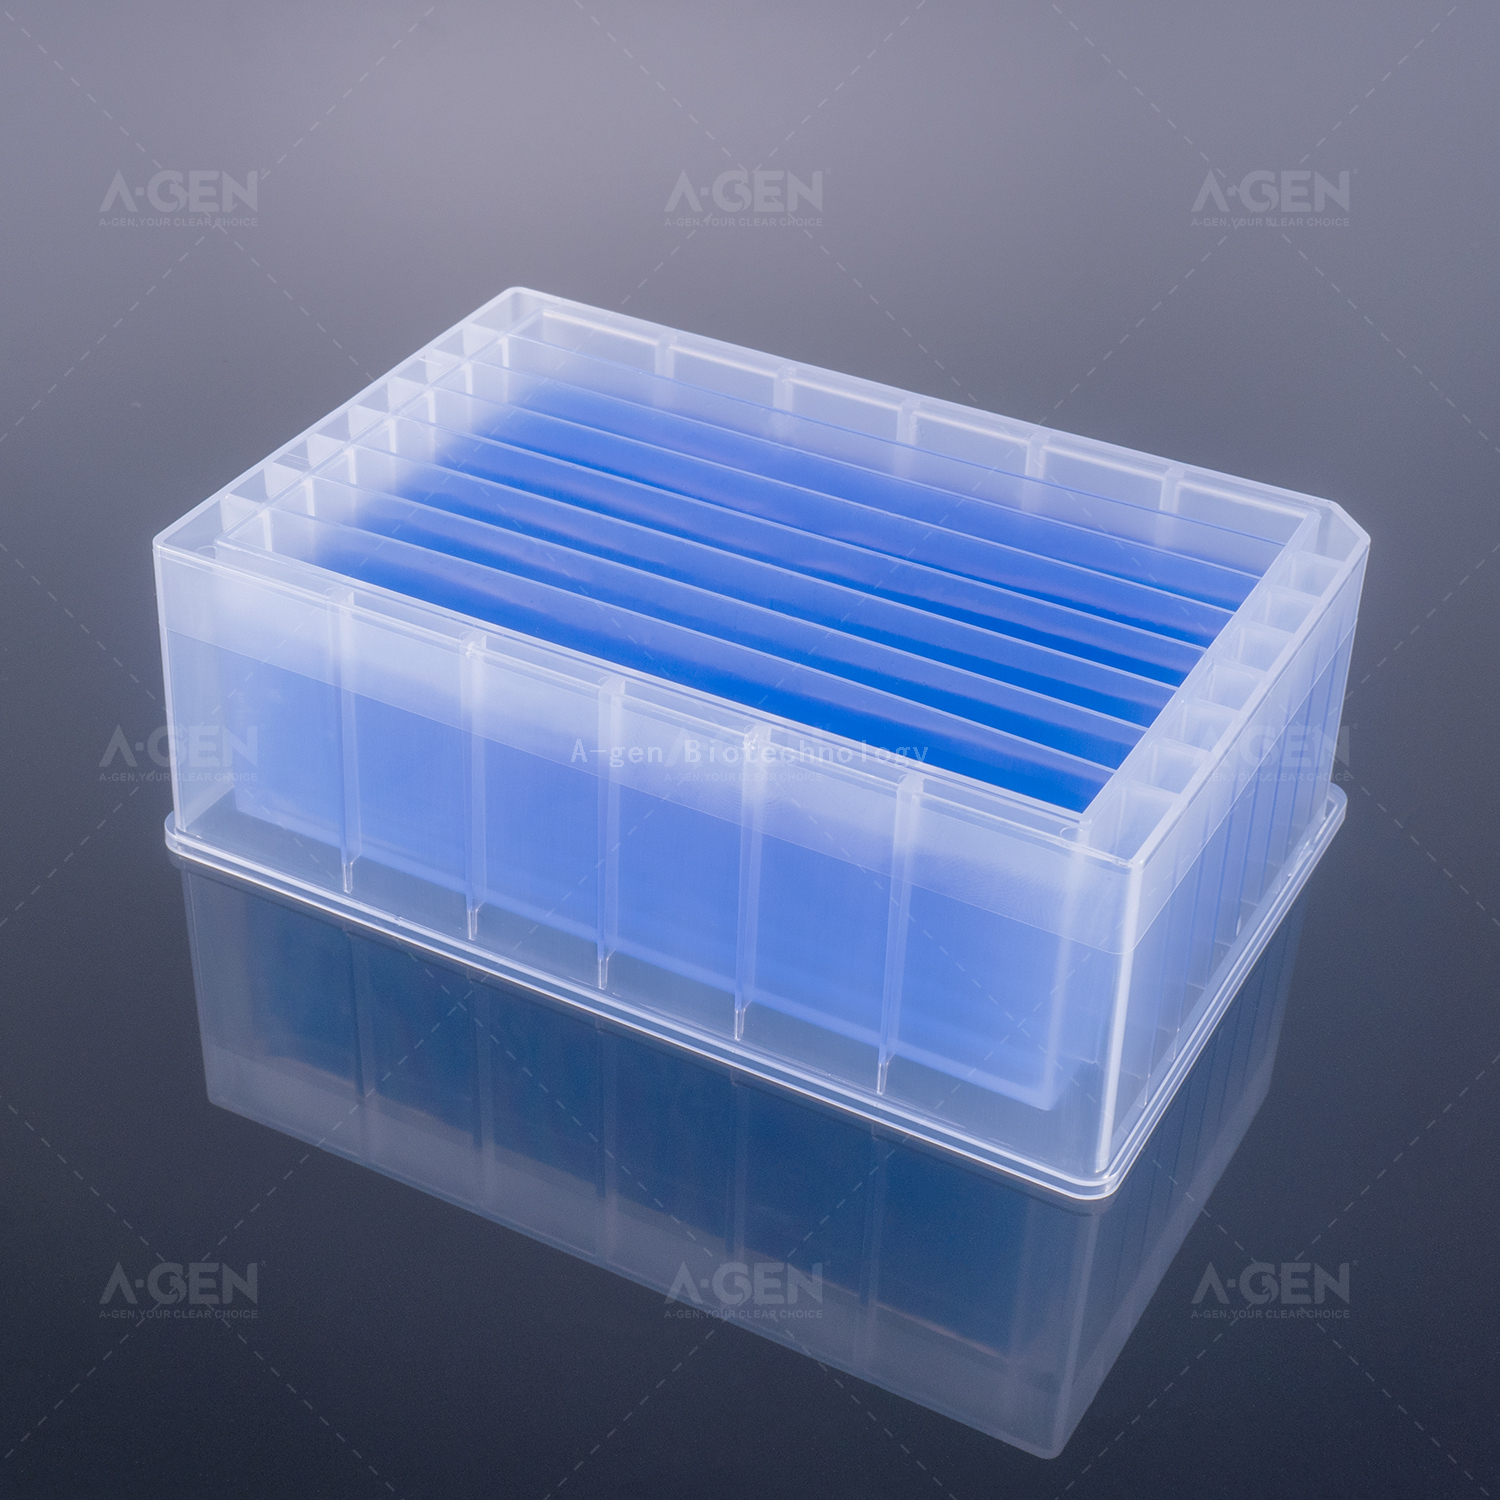 8 Channel Troughs 32mL Pipetting Reagent Reservoir - High Profile SBS Standards